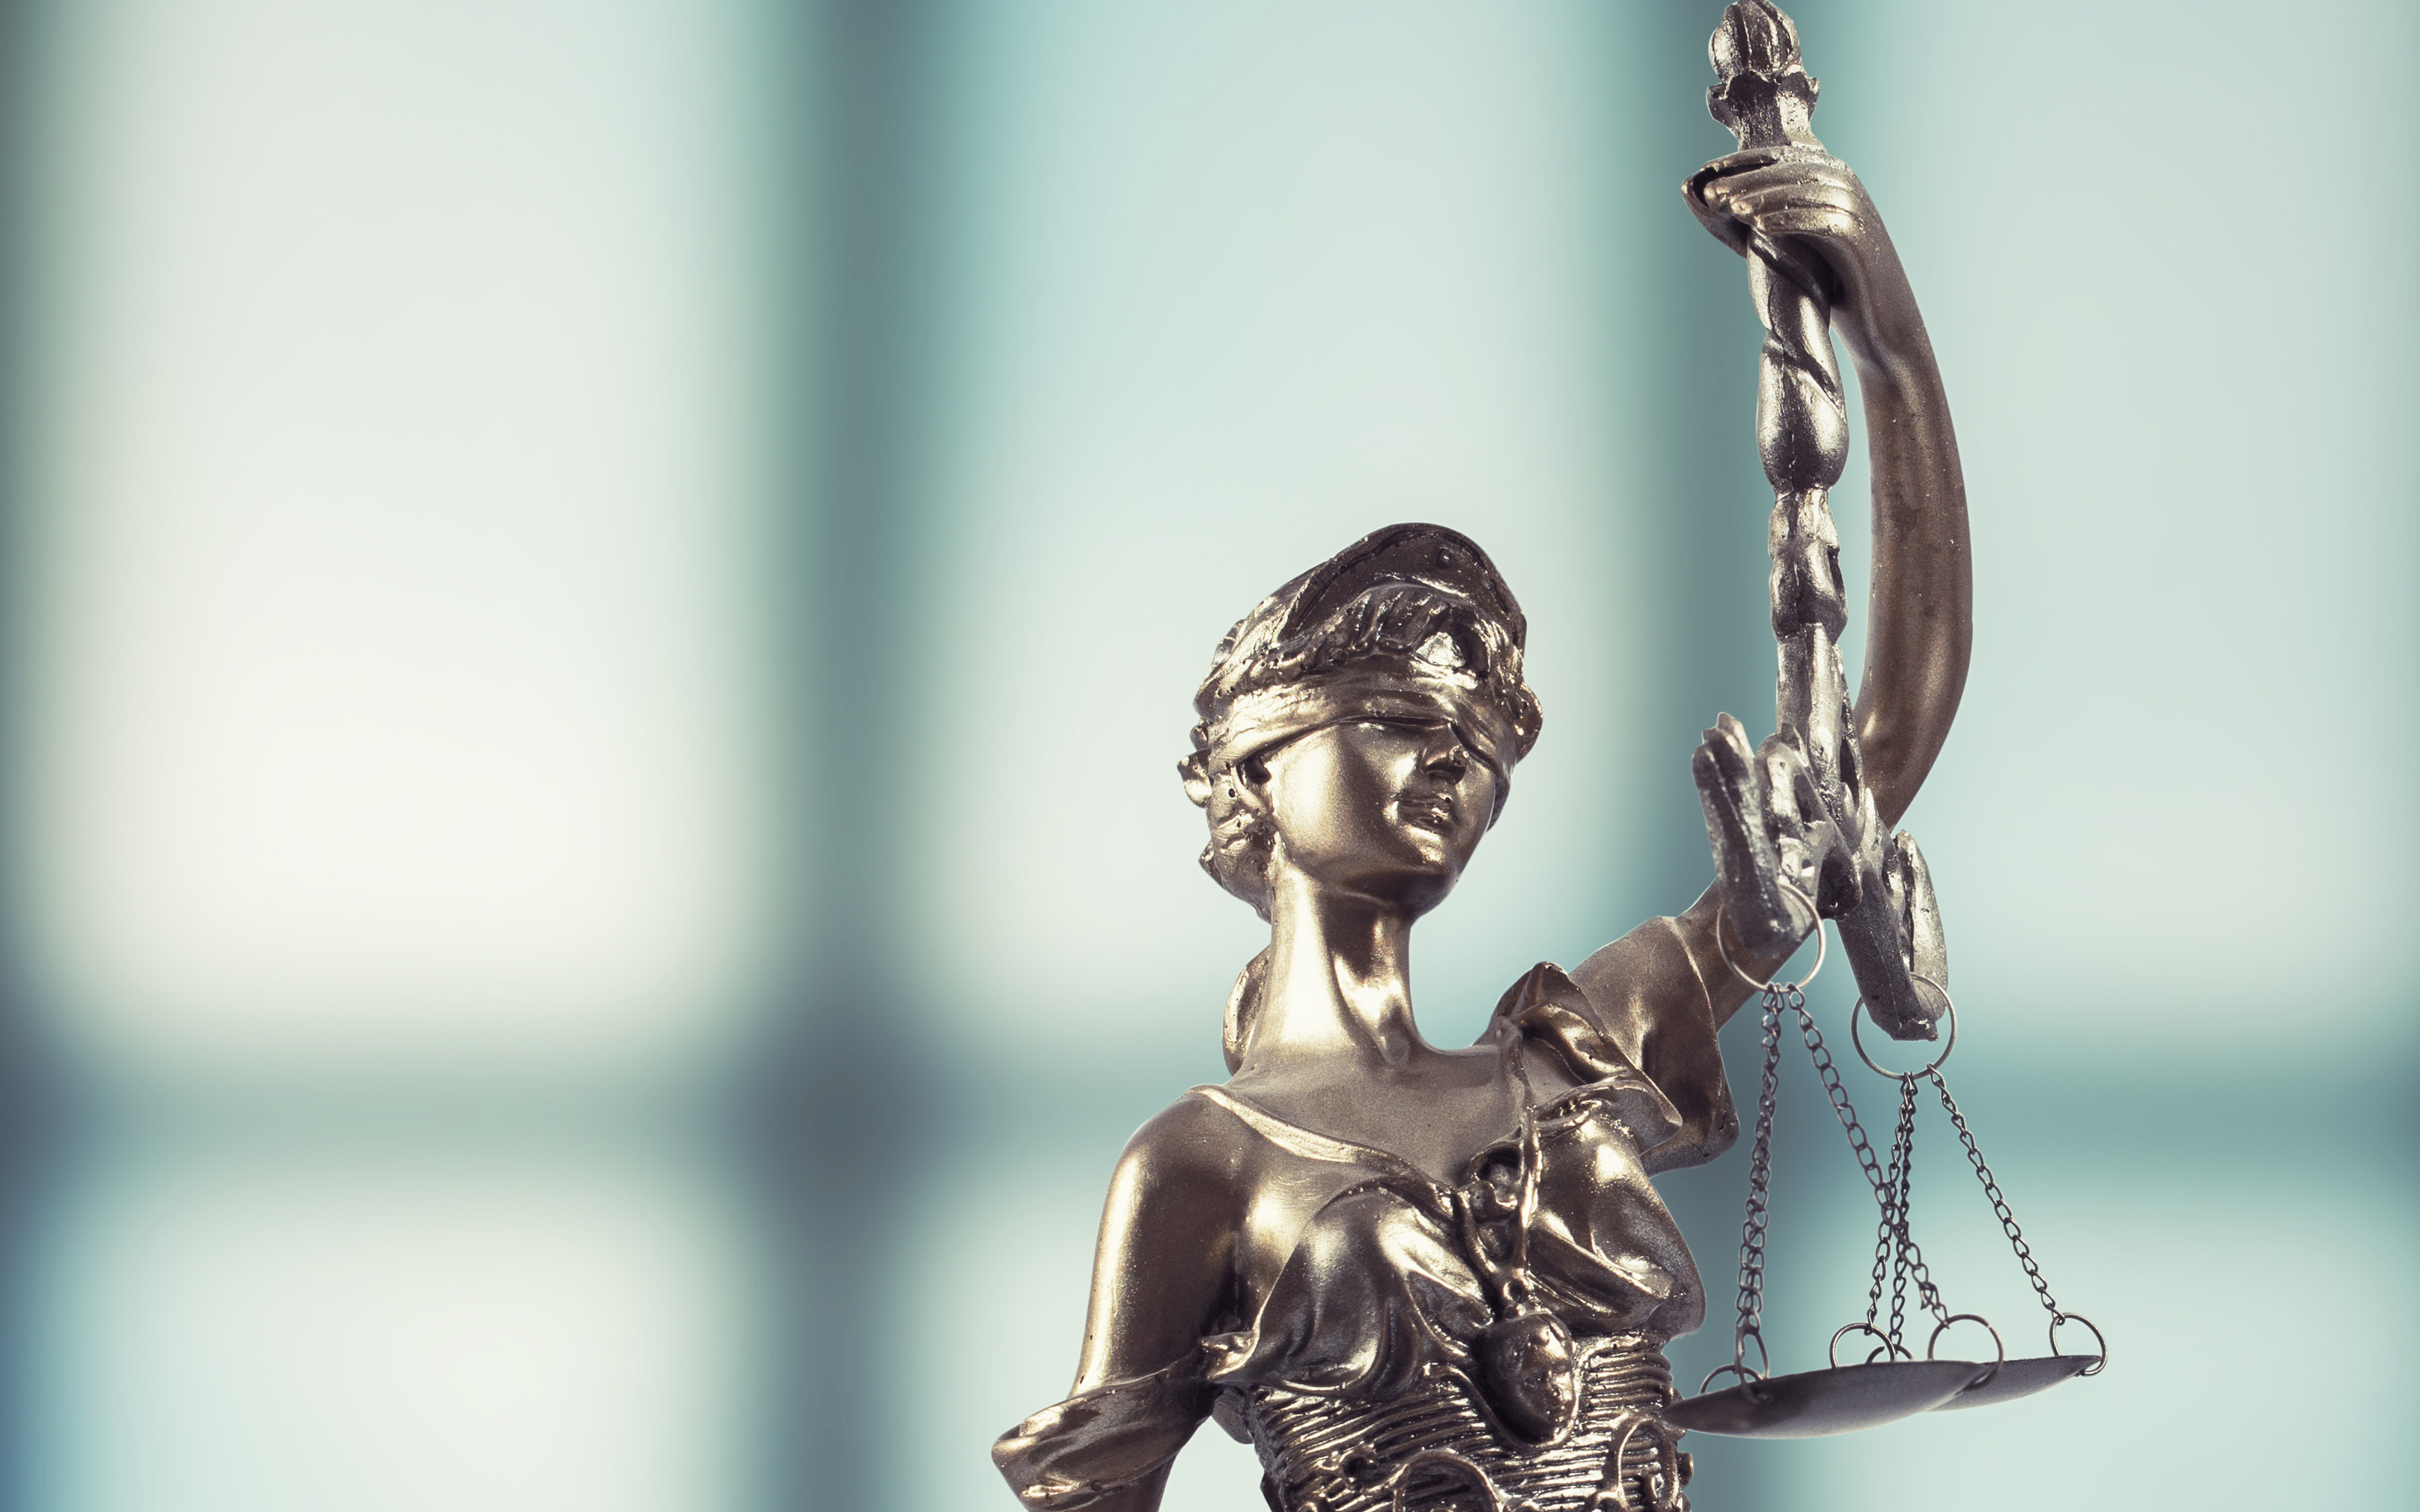 Download wallpaper Lady Justice, Statue of Justice, lawyers concepts, justice concepts, Statuette of Justice for desktop with resolution 2880x1800. High Quality HD picture wallpaper